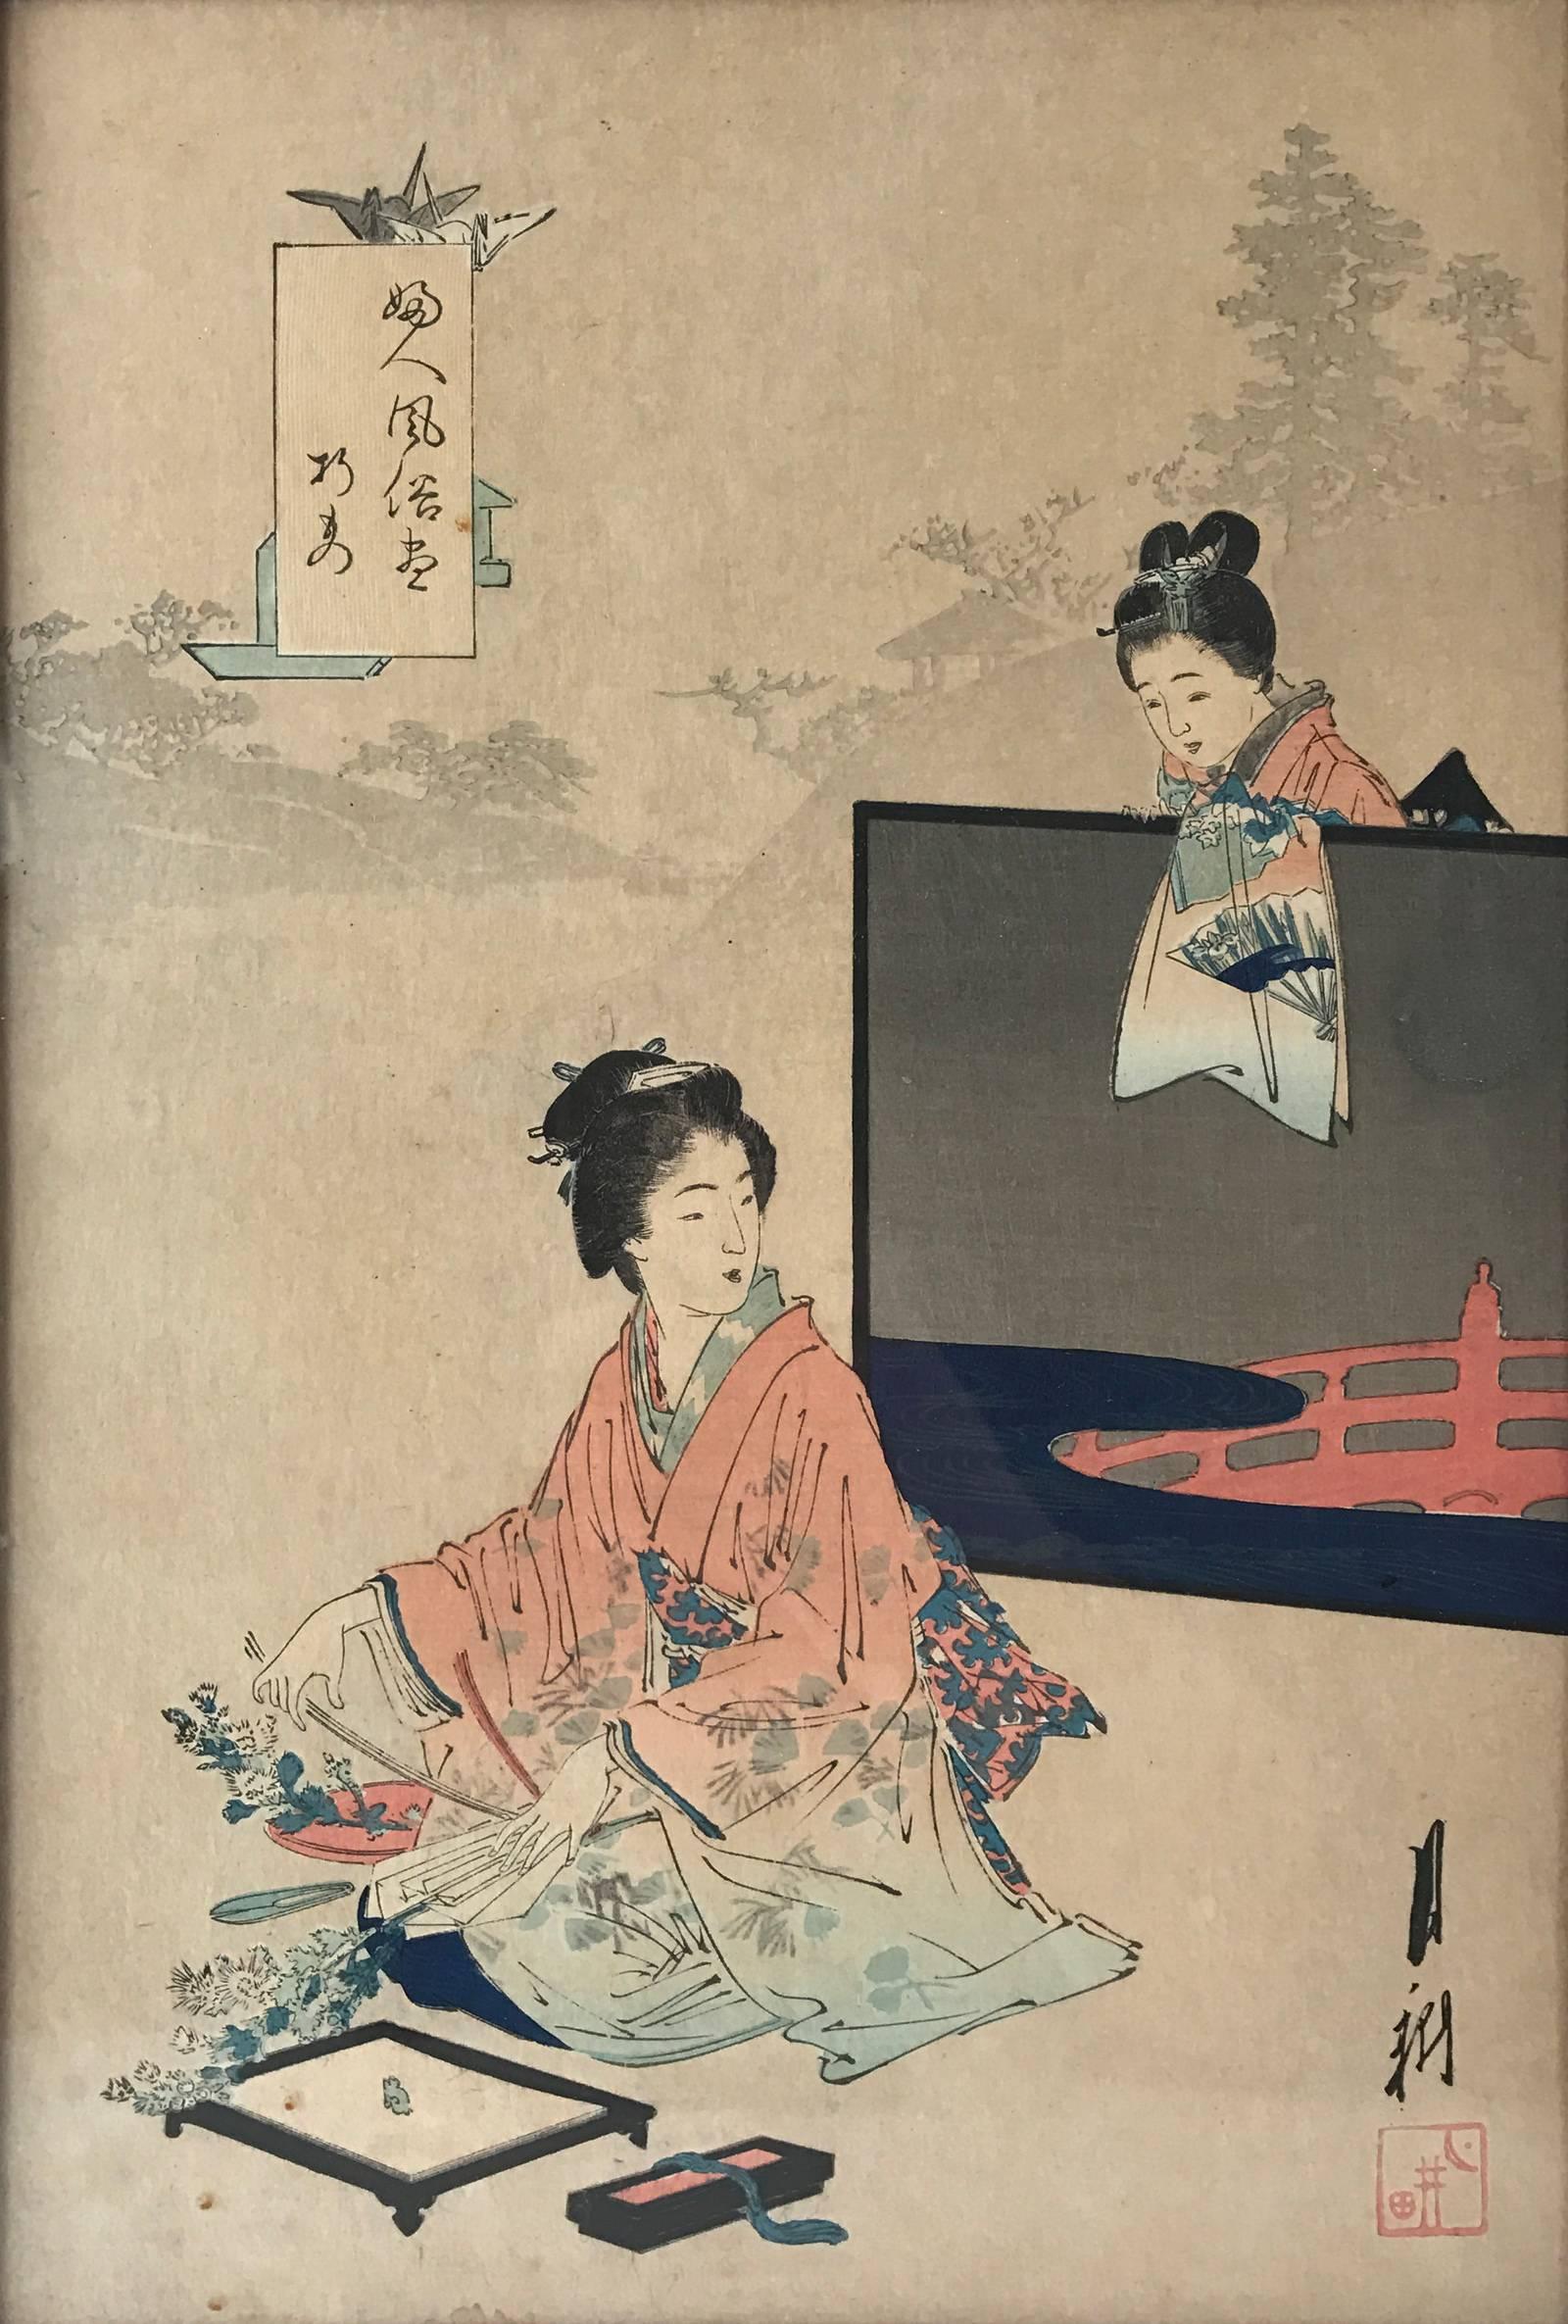 Winner of numerous national and international awards, the woodblock artist Ogata Gekkō (尾形月耕, 1859–1920), was prized for his sensitive and lifelike depictions of people. In this work, he show two elegant women, one arranging cherry blossoms, and